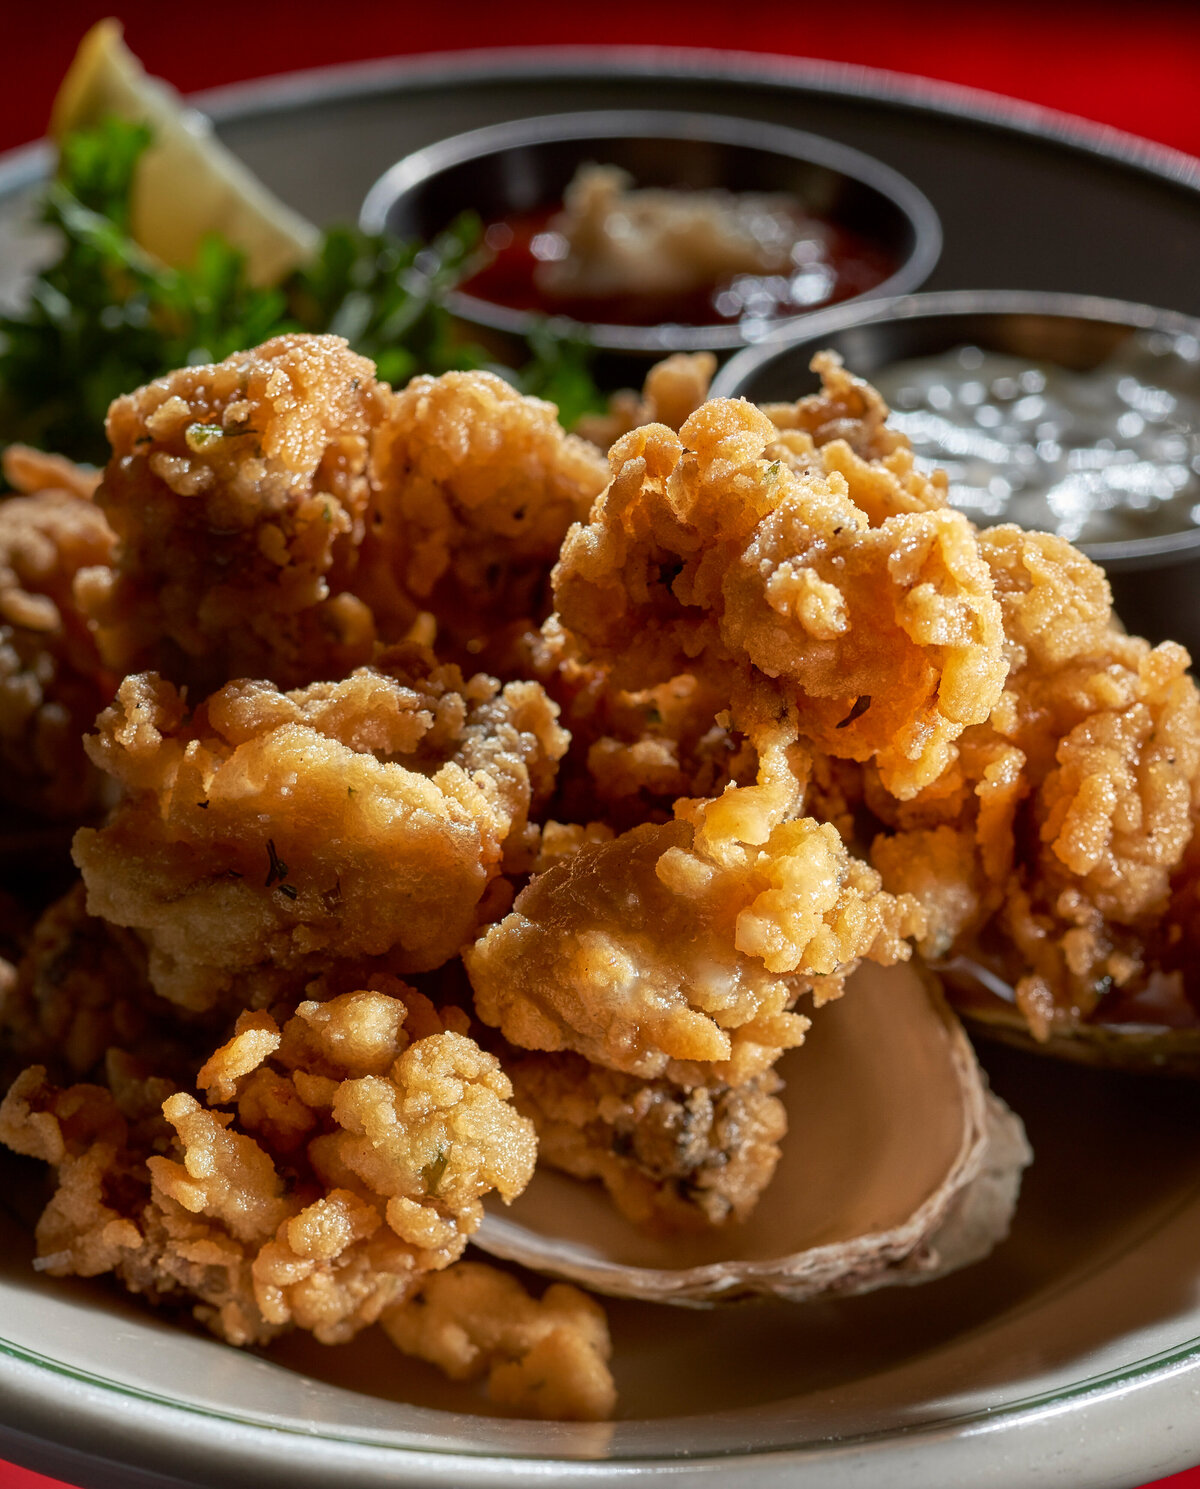 Fried oysters on a plate